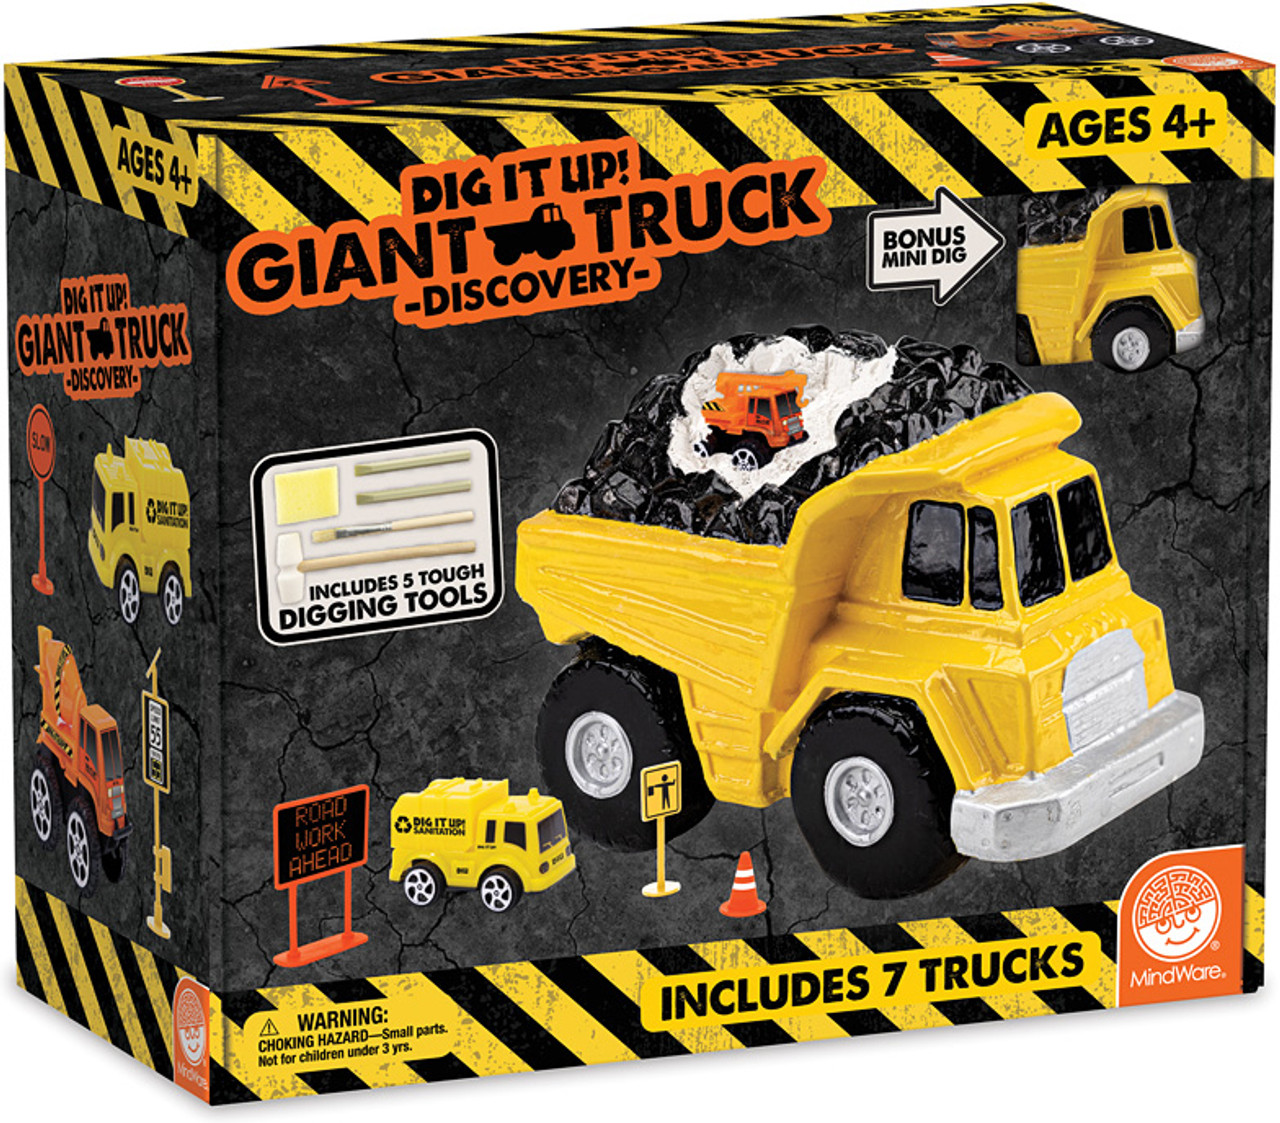 Dig It Up! Giant Truck Discovery 1